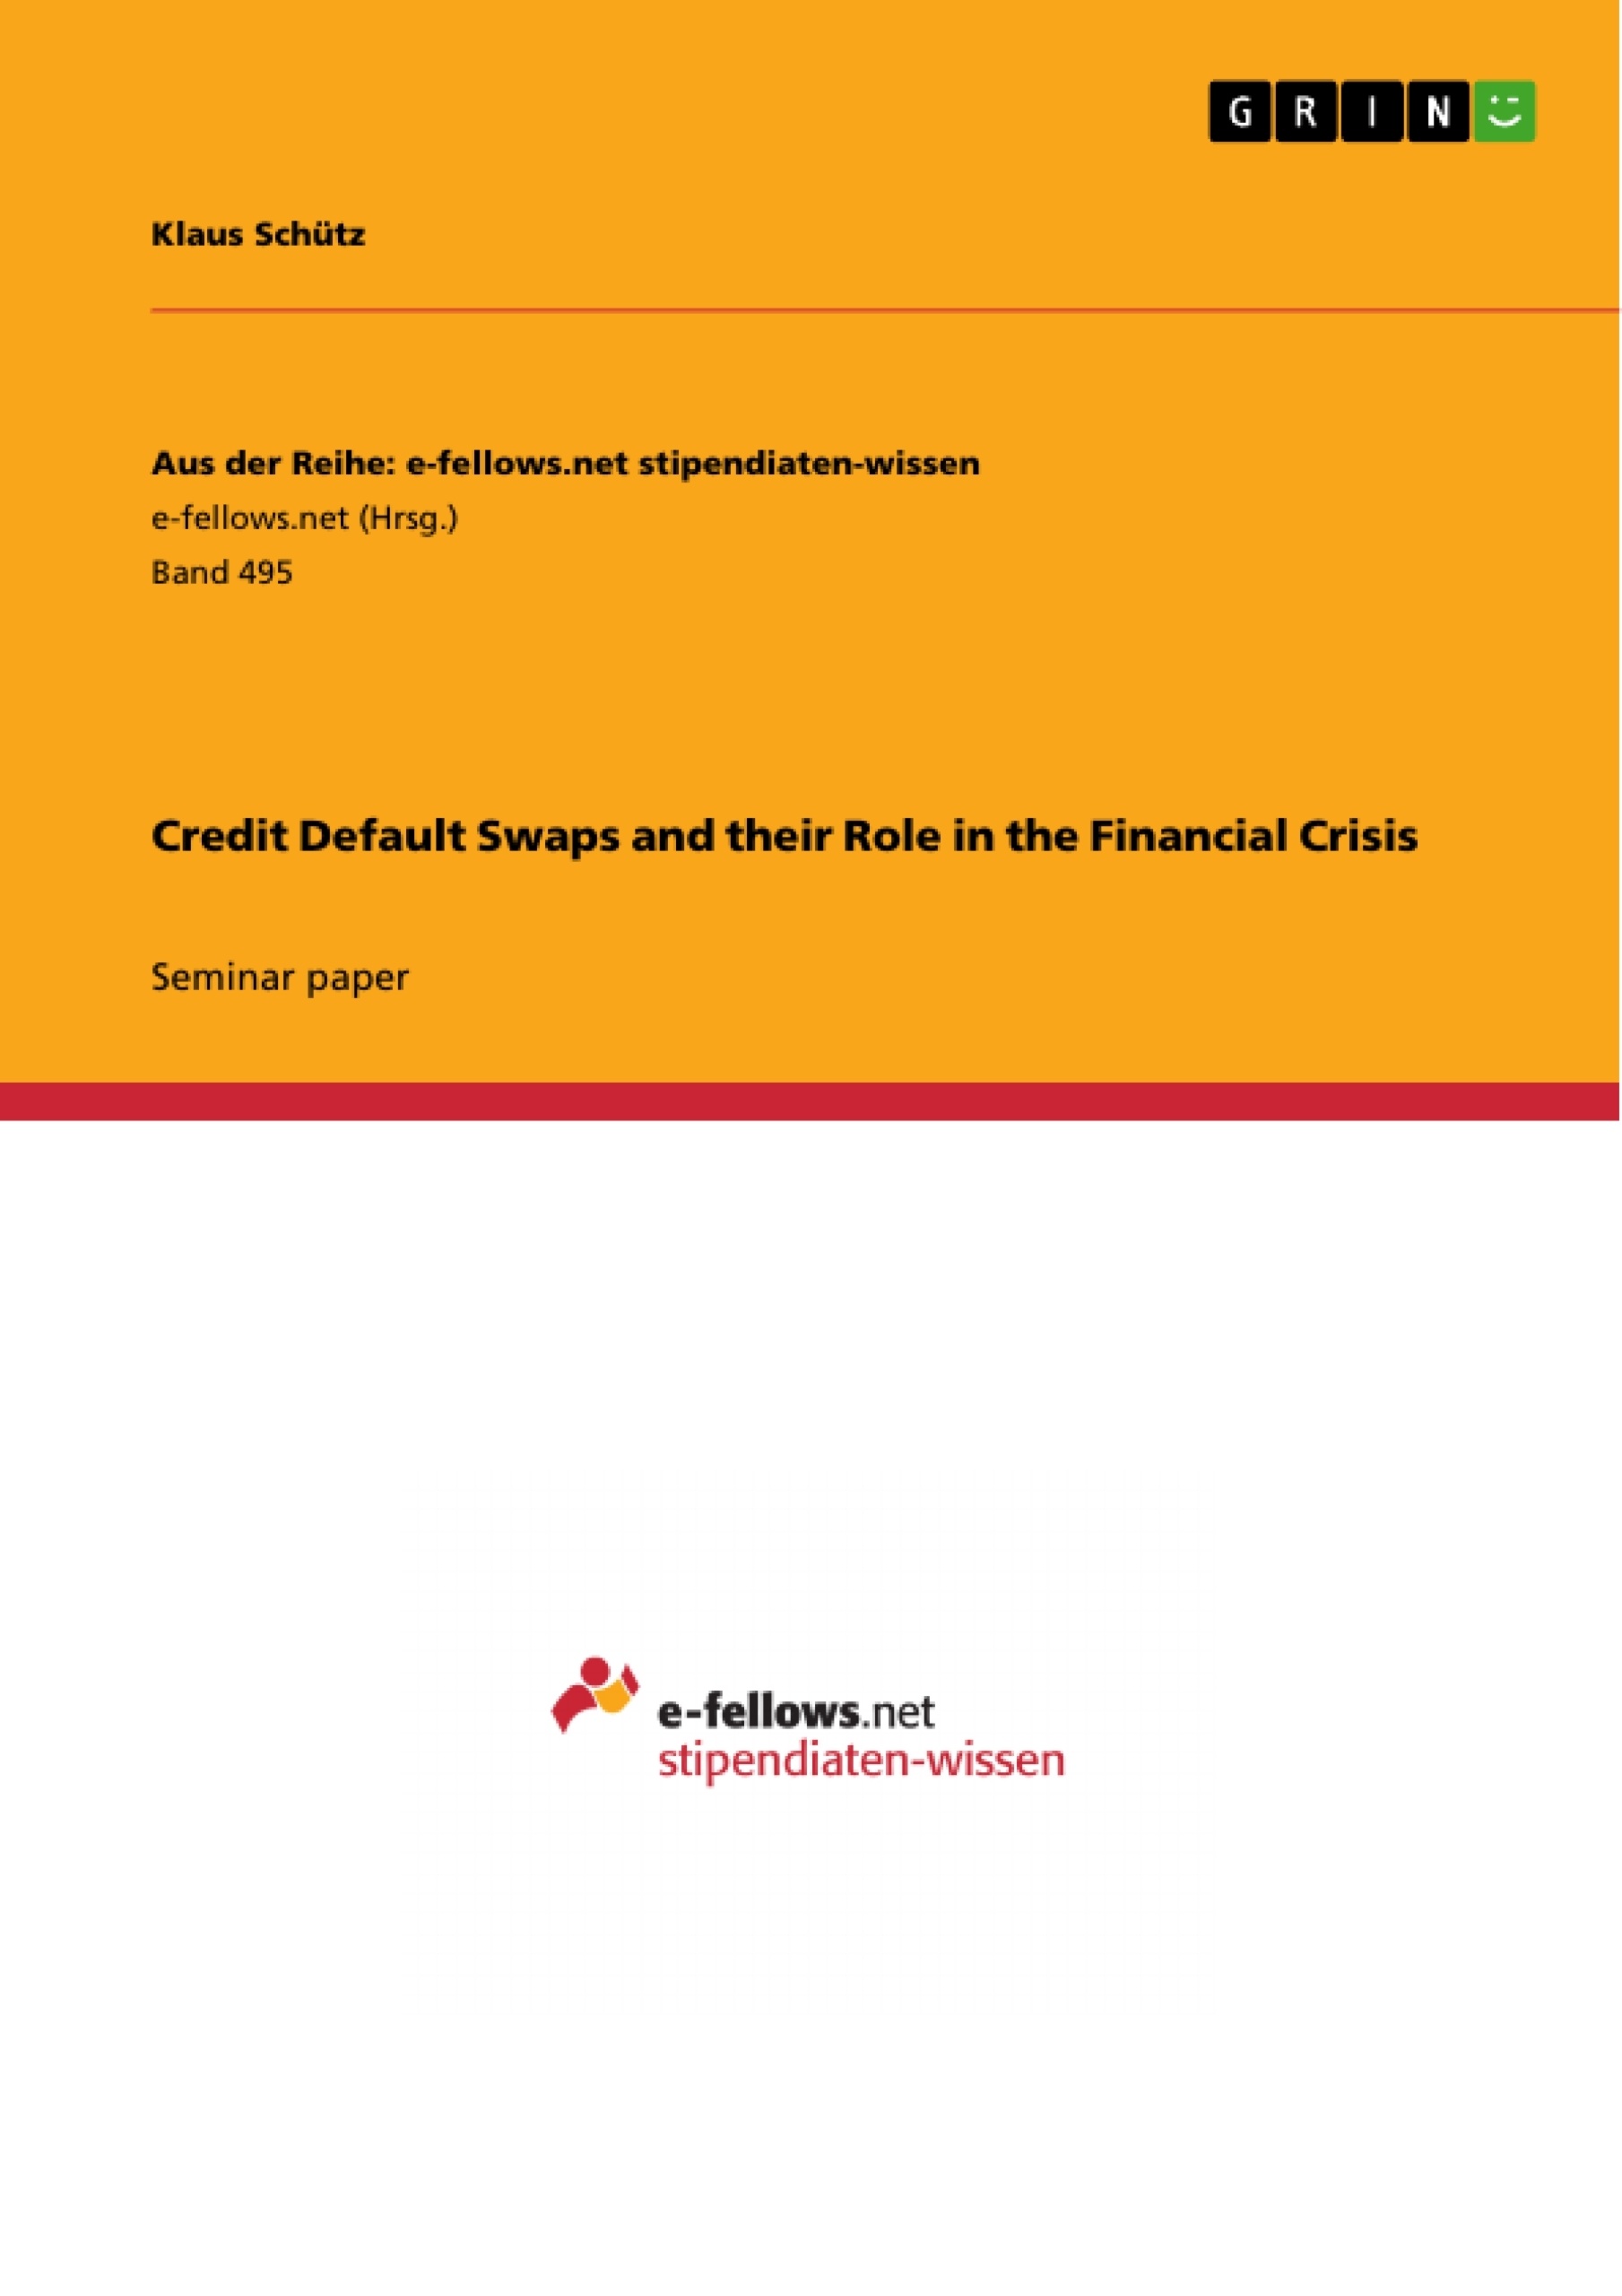 Title: Credit Default Swaps and their Role in the Financial Crisis